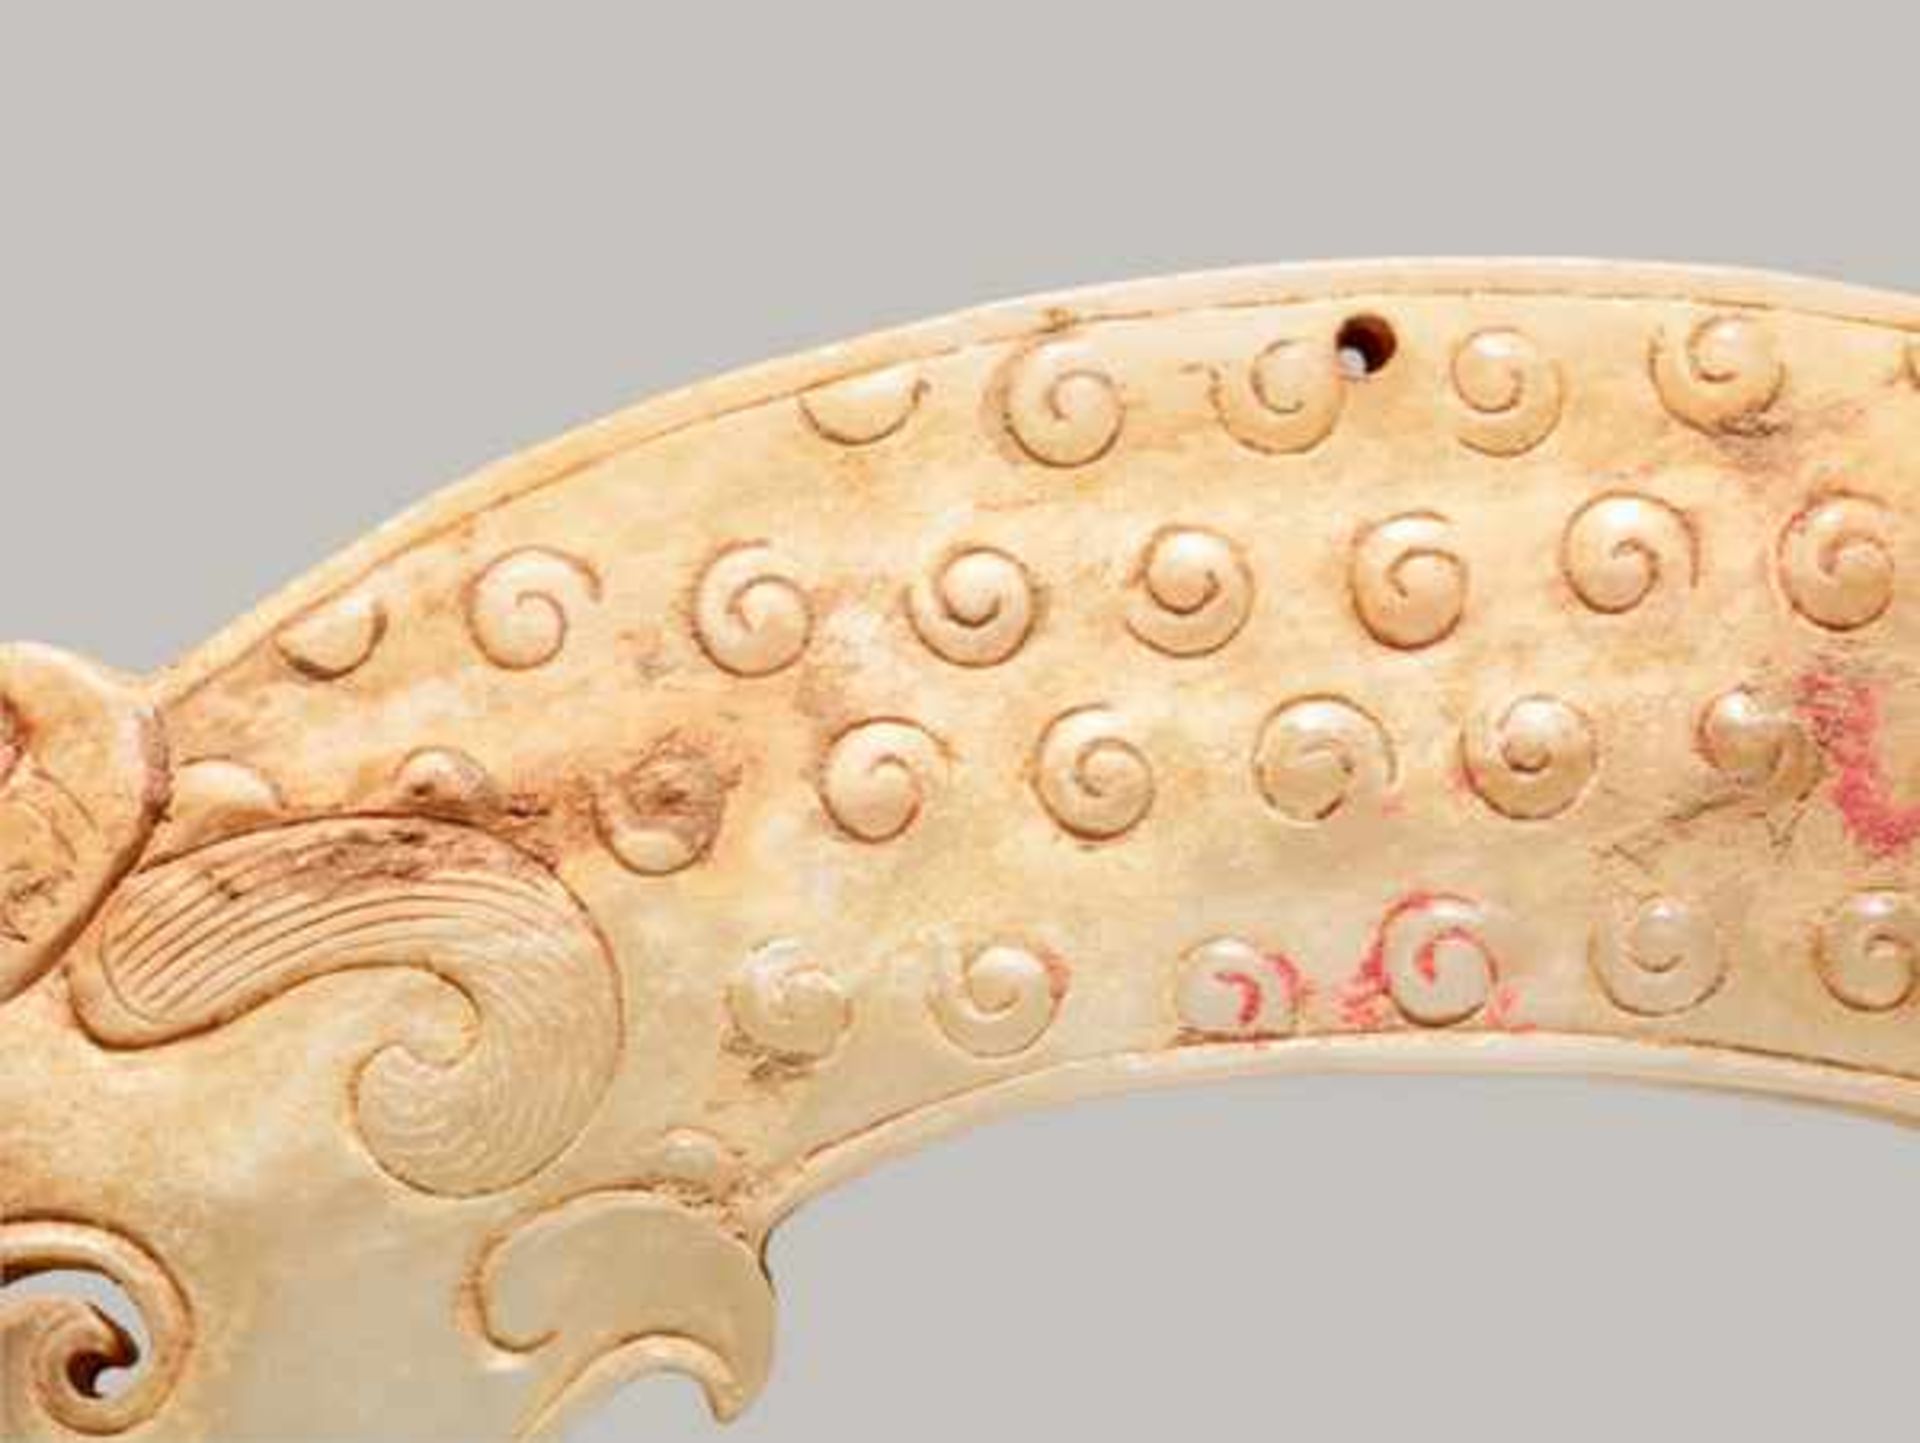 A POWERFUL HUANG ARCHED PENDANT WITH FINELY DETAILED DRAGON HEADS AND A PATTERN OF RAISED CURLS - Image 4 of 8